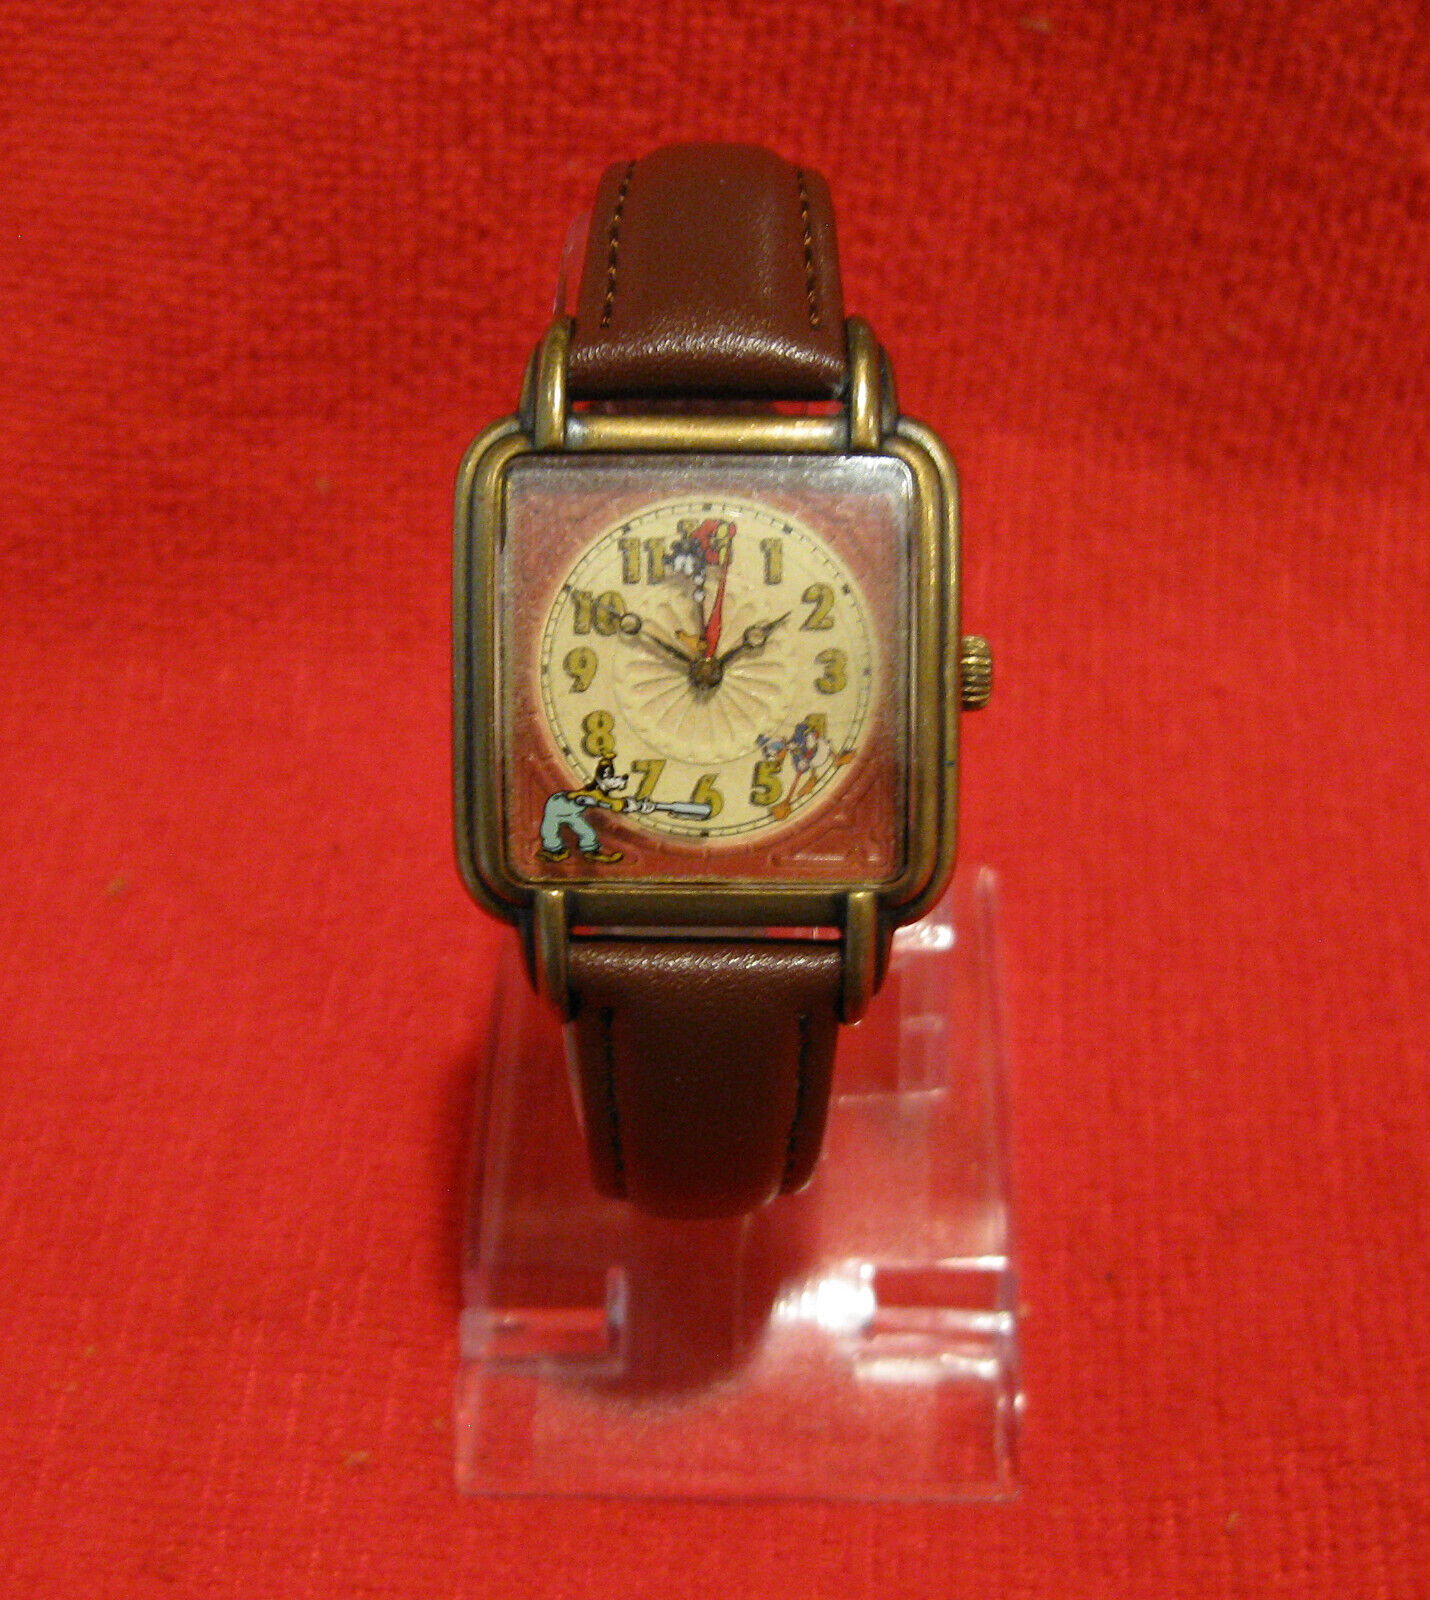 REALLY RARE DISNEY CLOCK CLEANERS WATCH GOOFY DONALD MICKEY WORKING NU BAND